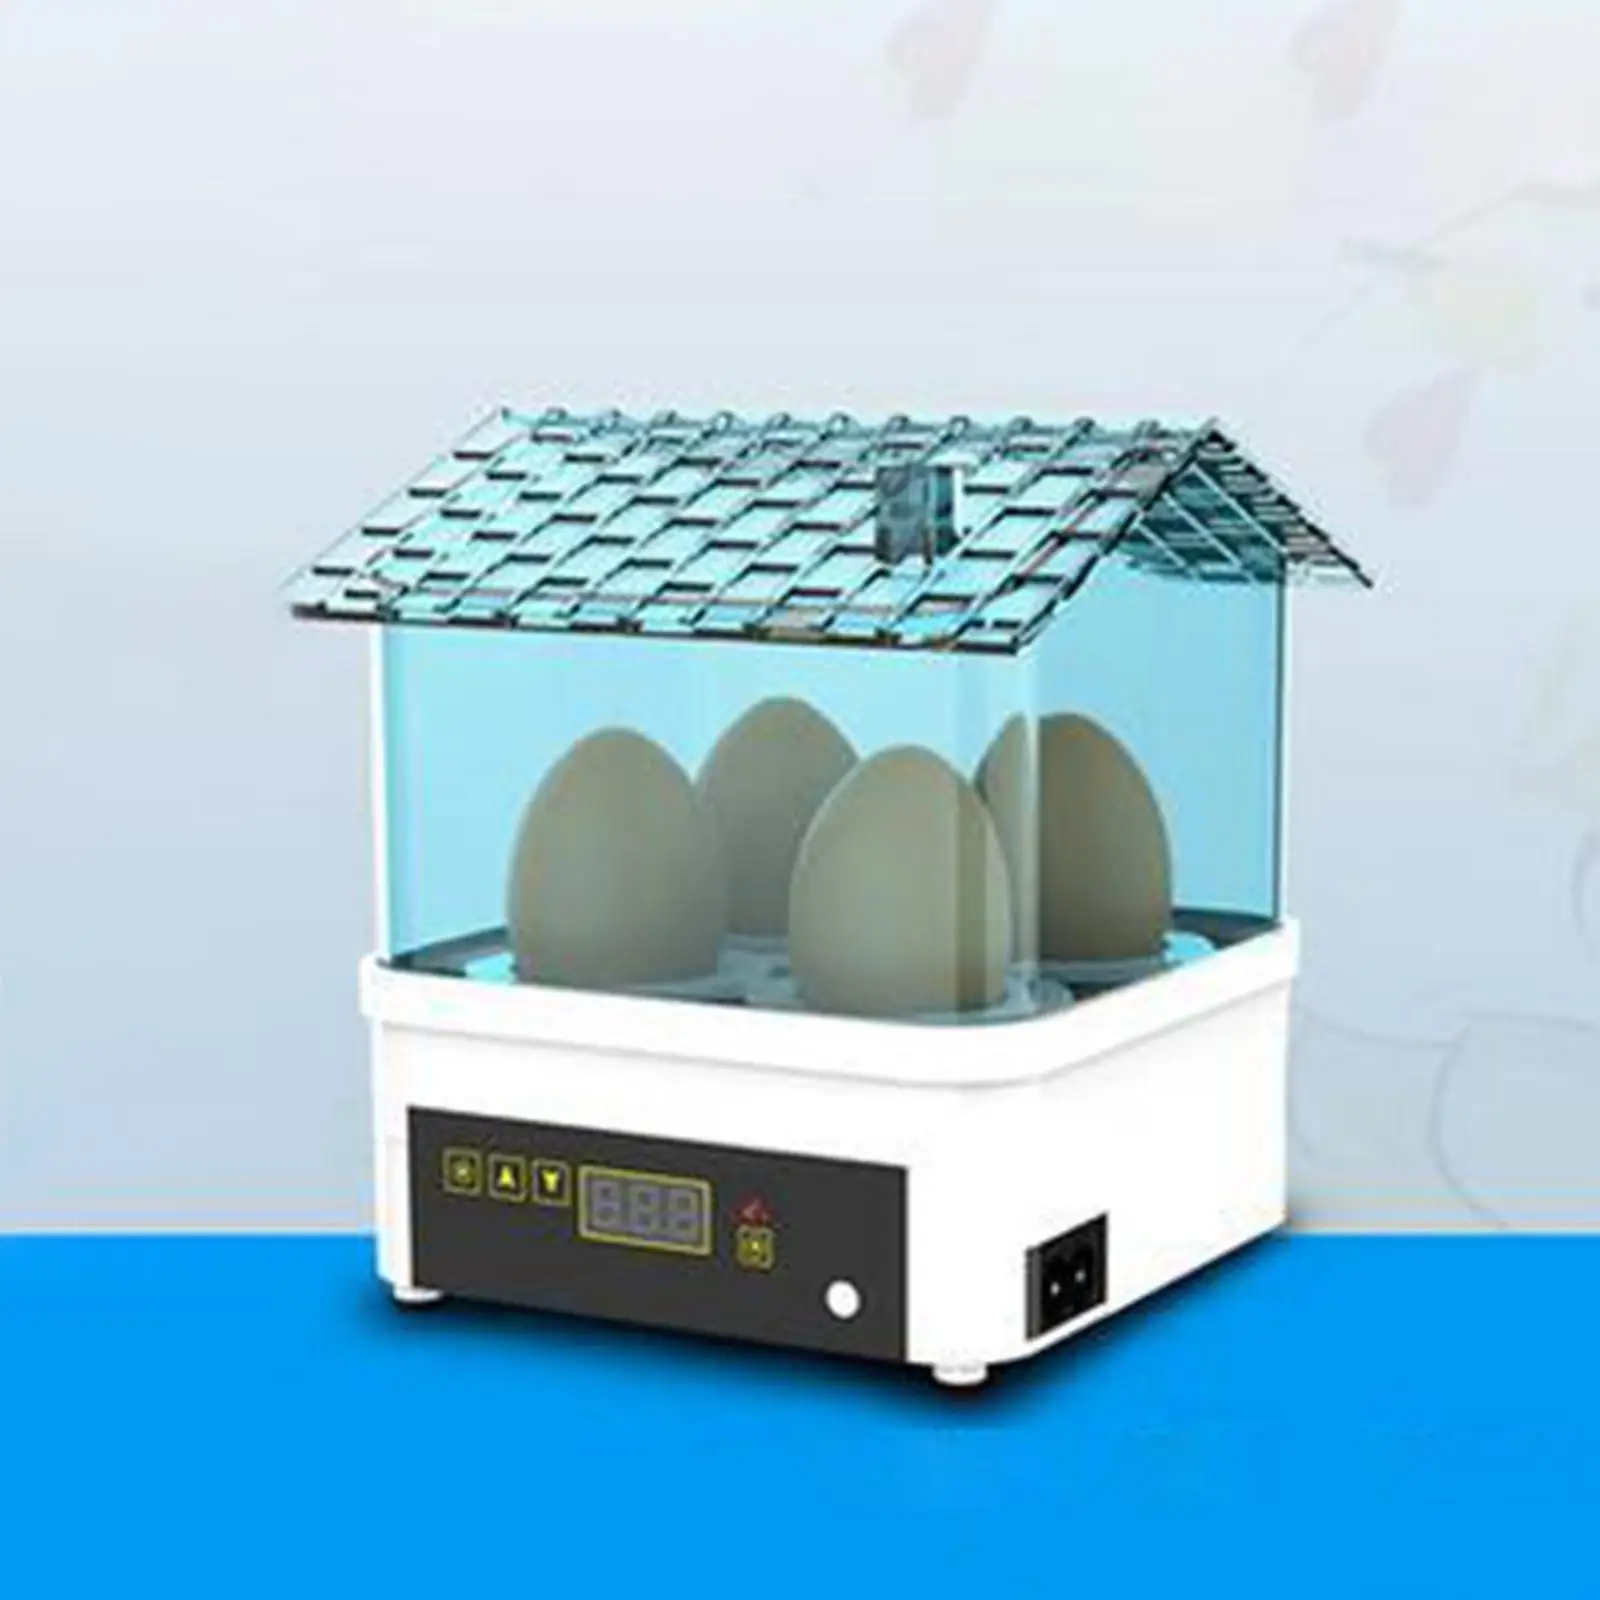 Digital Eggs Incubator Poultry Hatcher Tray Hatching 4 Eggs Temperature Control for Quail Bird